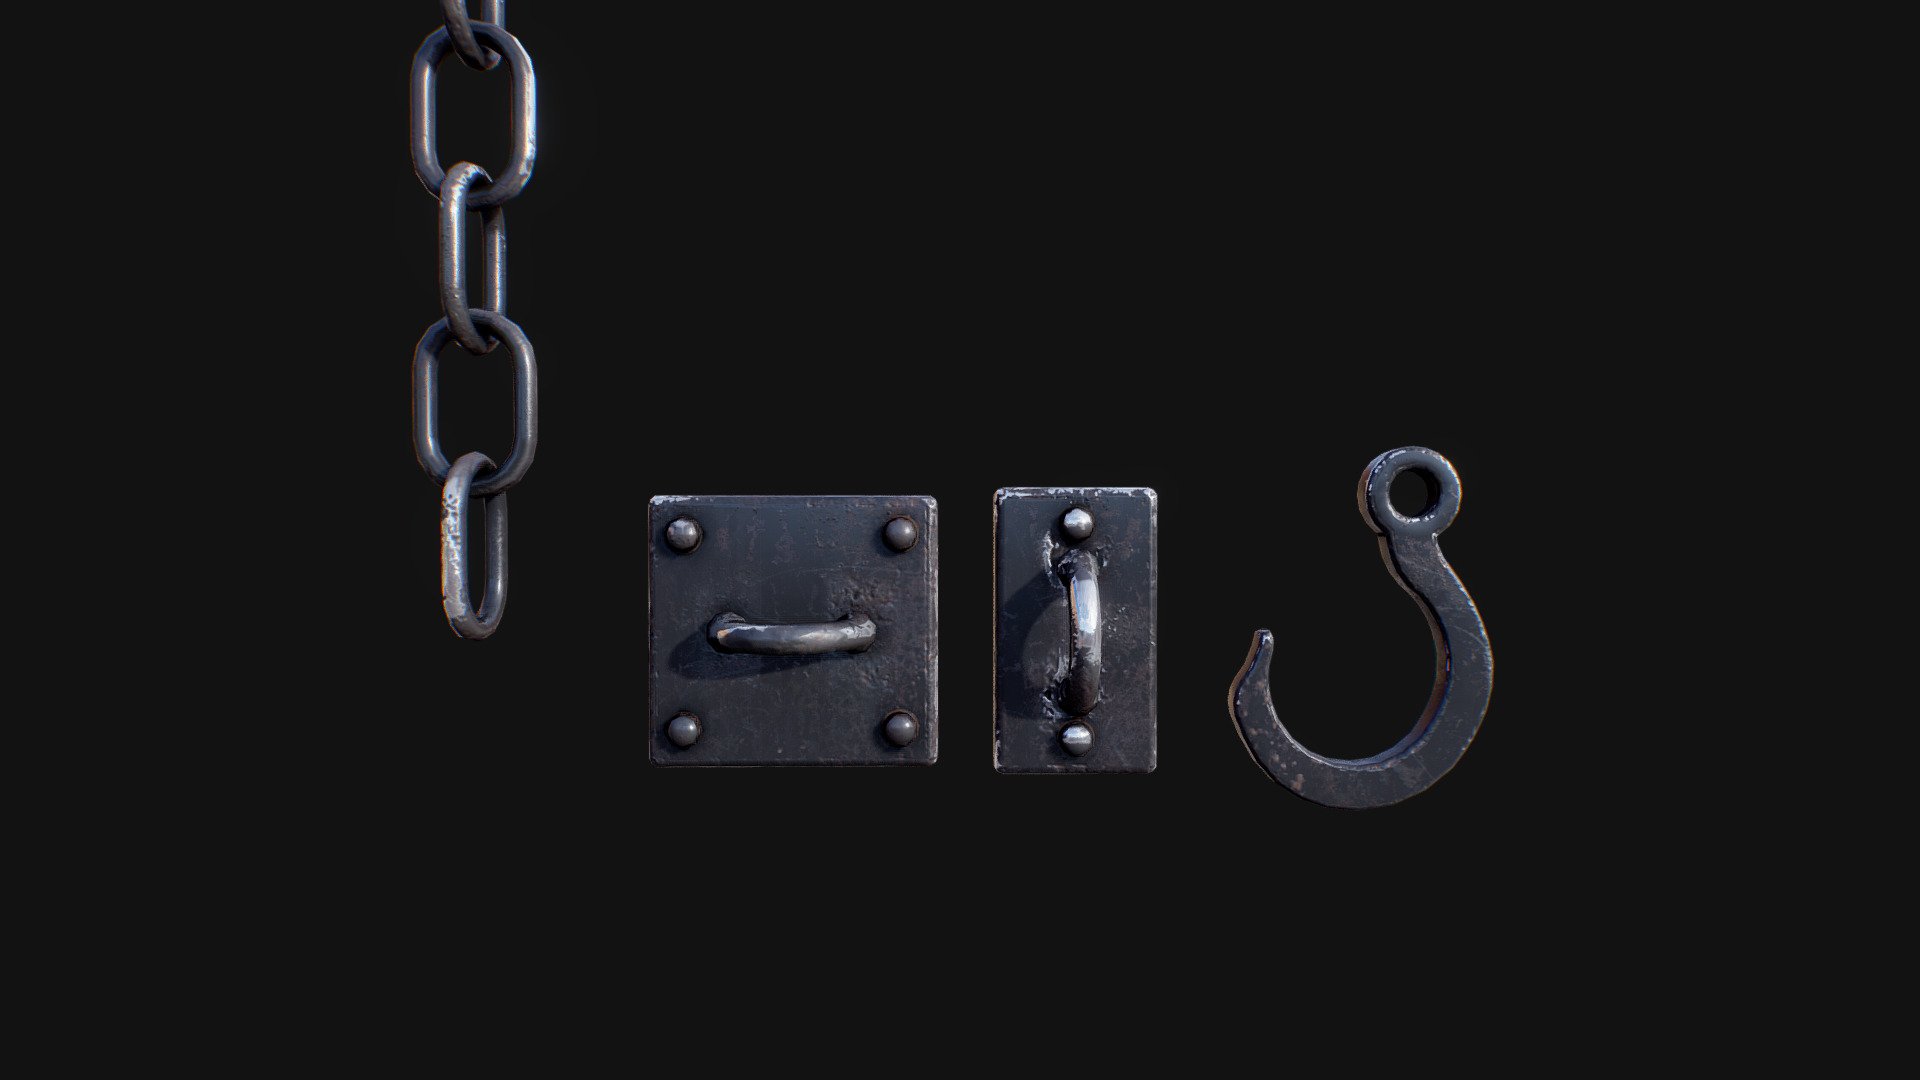 Additional parts for my bondage horse model.
1k - Chain and hook for bondage/wall meshes - 3D model by Siberia (@LtxxwSibeRia) 3d model